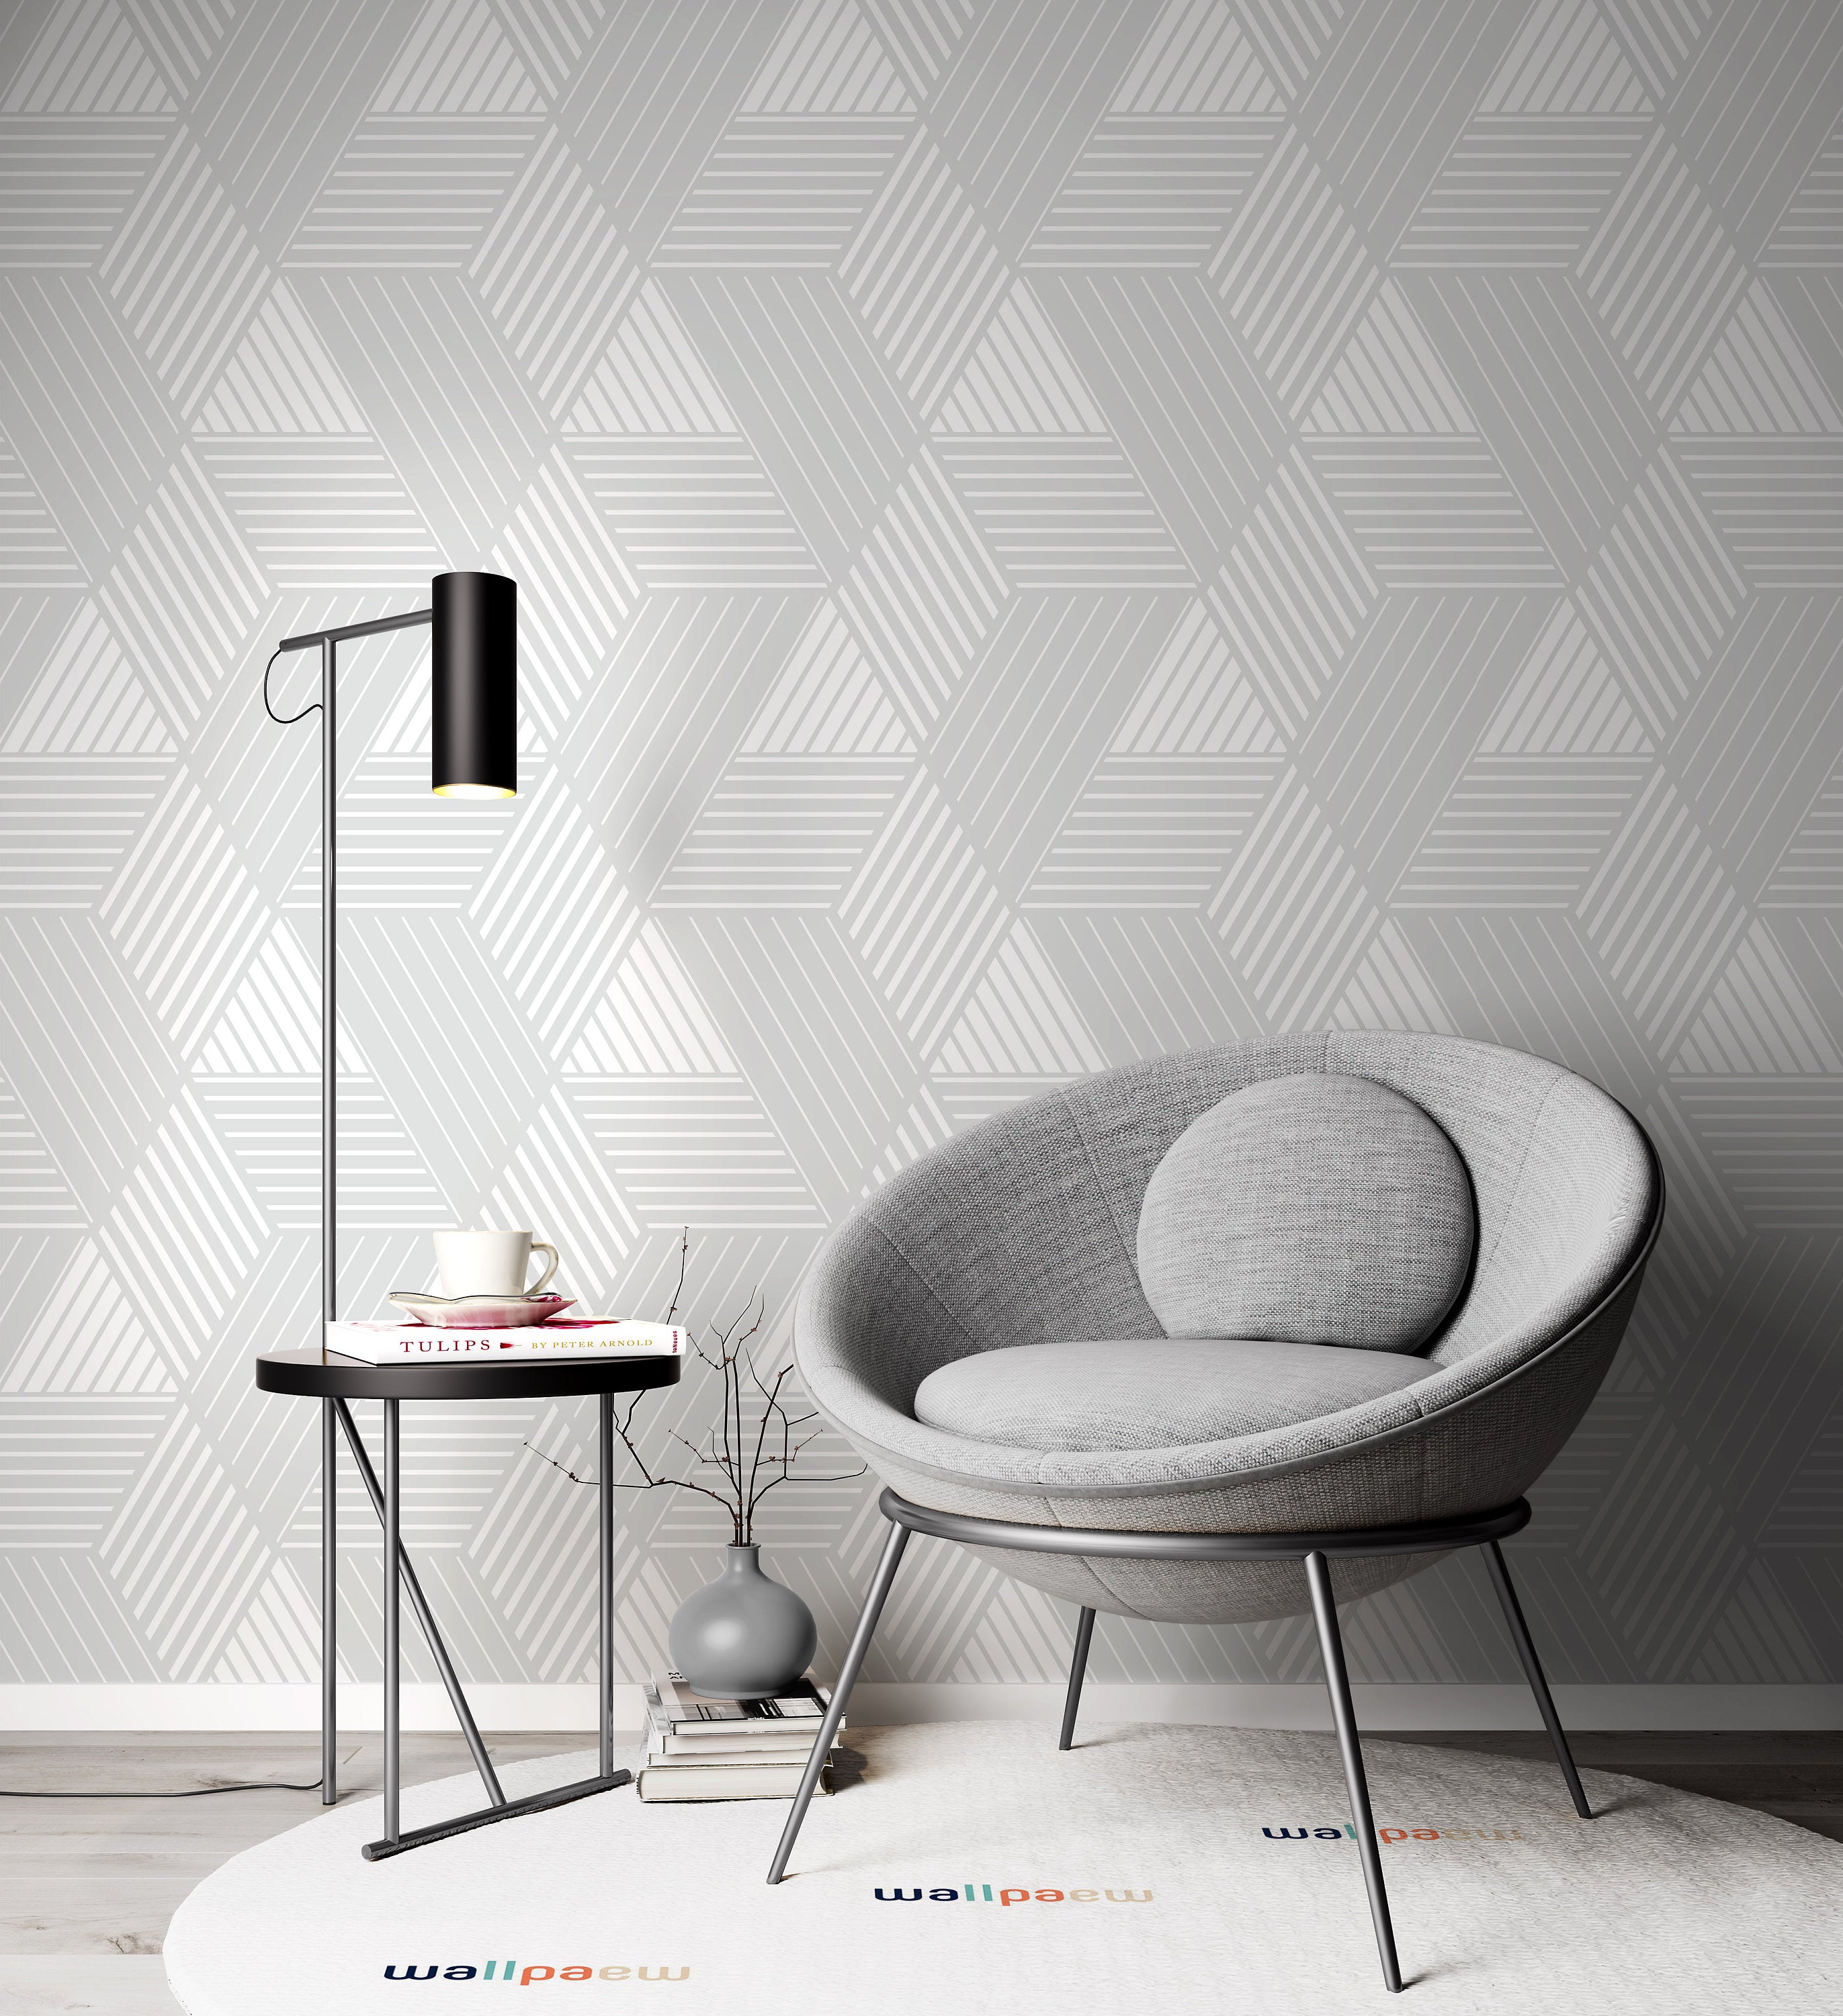 Abstract Geometric Pattern with Lines Gray White Texture Wallpaper Self Adhesive Peel and Stick Wall Sticker Wall Decoration Removable